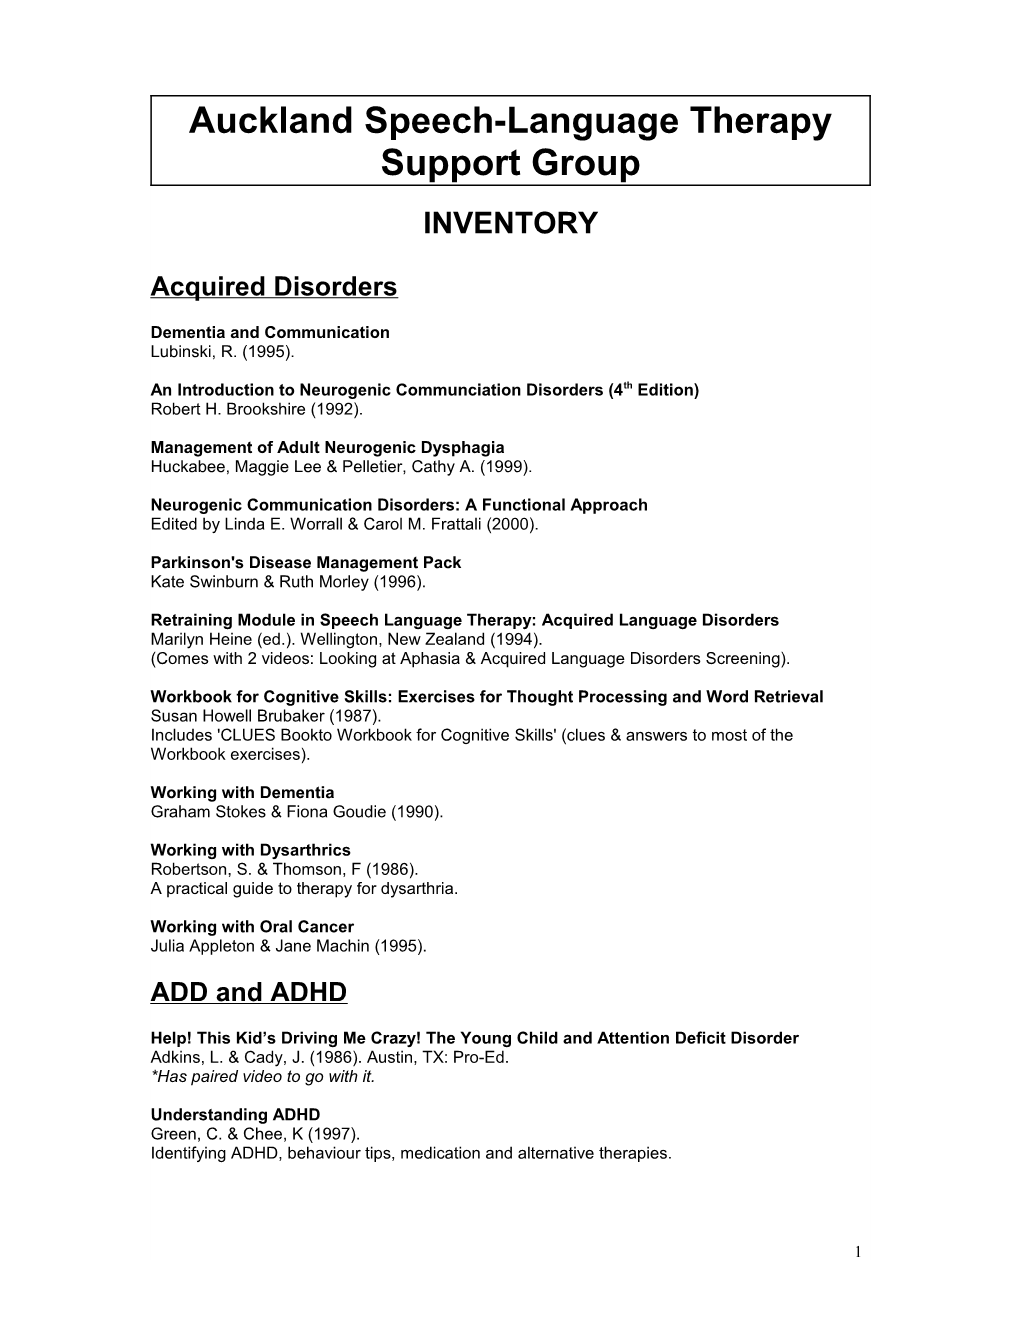 Inventory of Speech Language Therapy Support Group Resource Room Resources